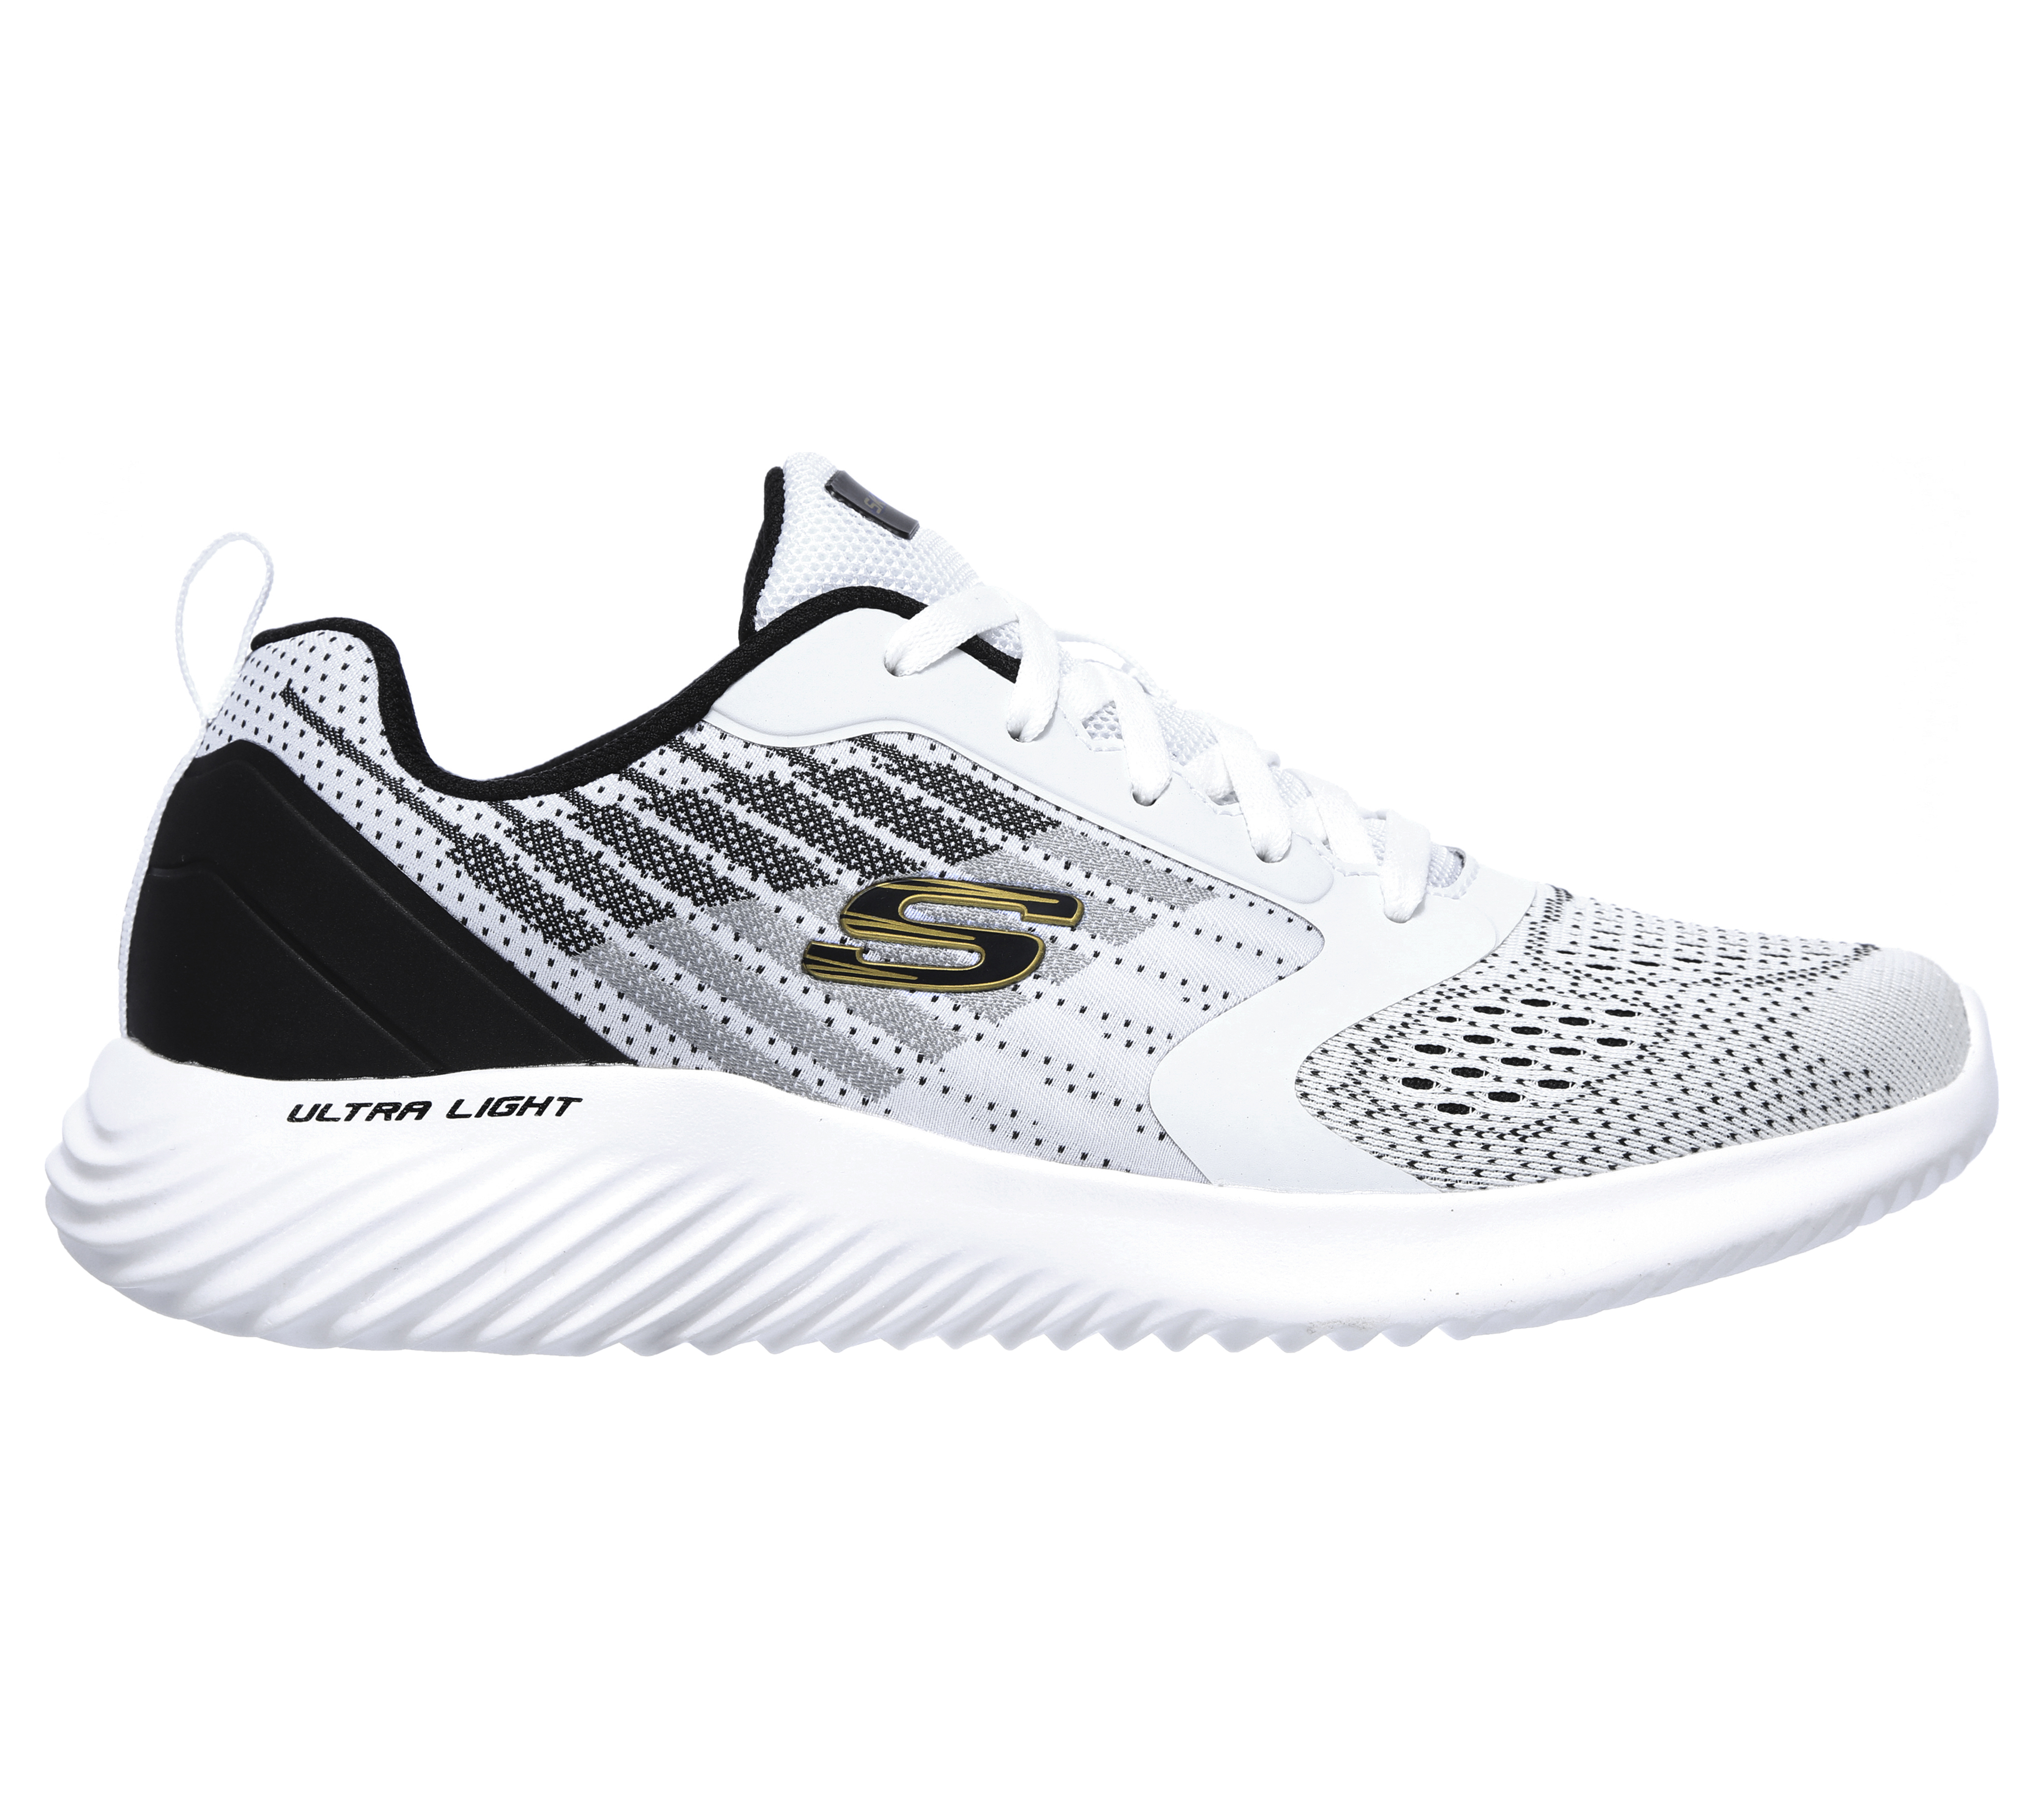 skechers bounder wolfston review